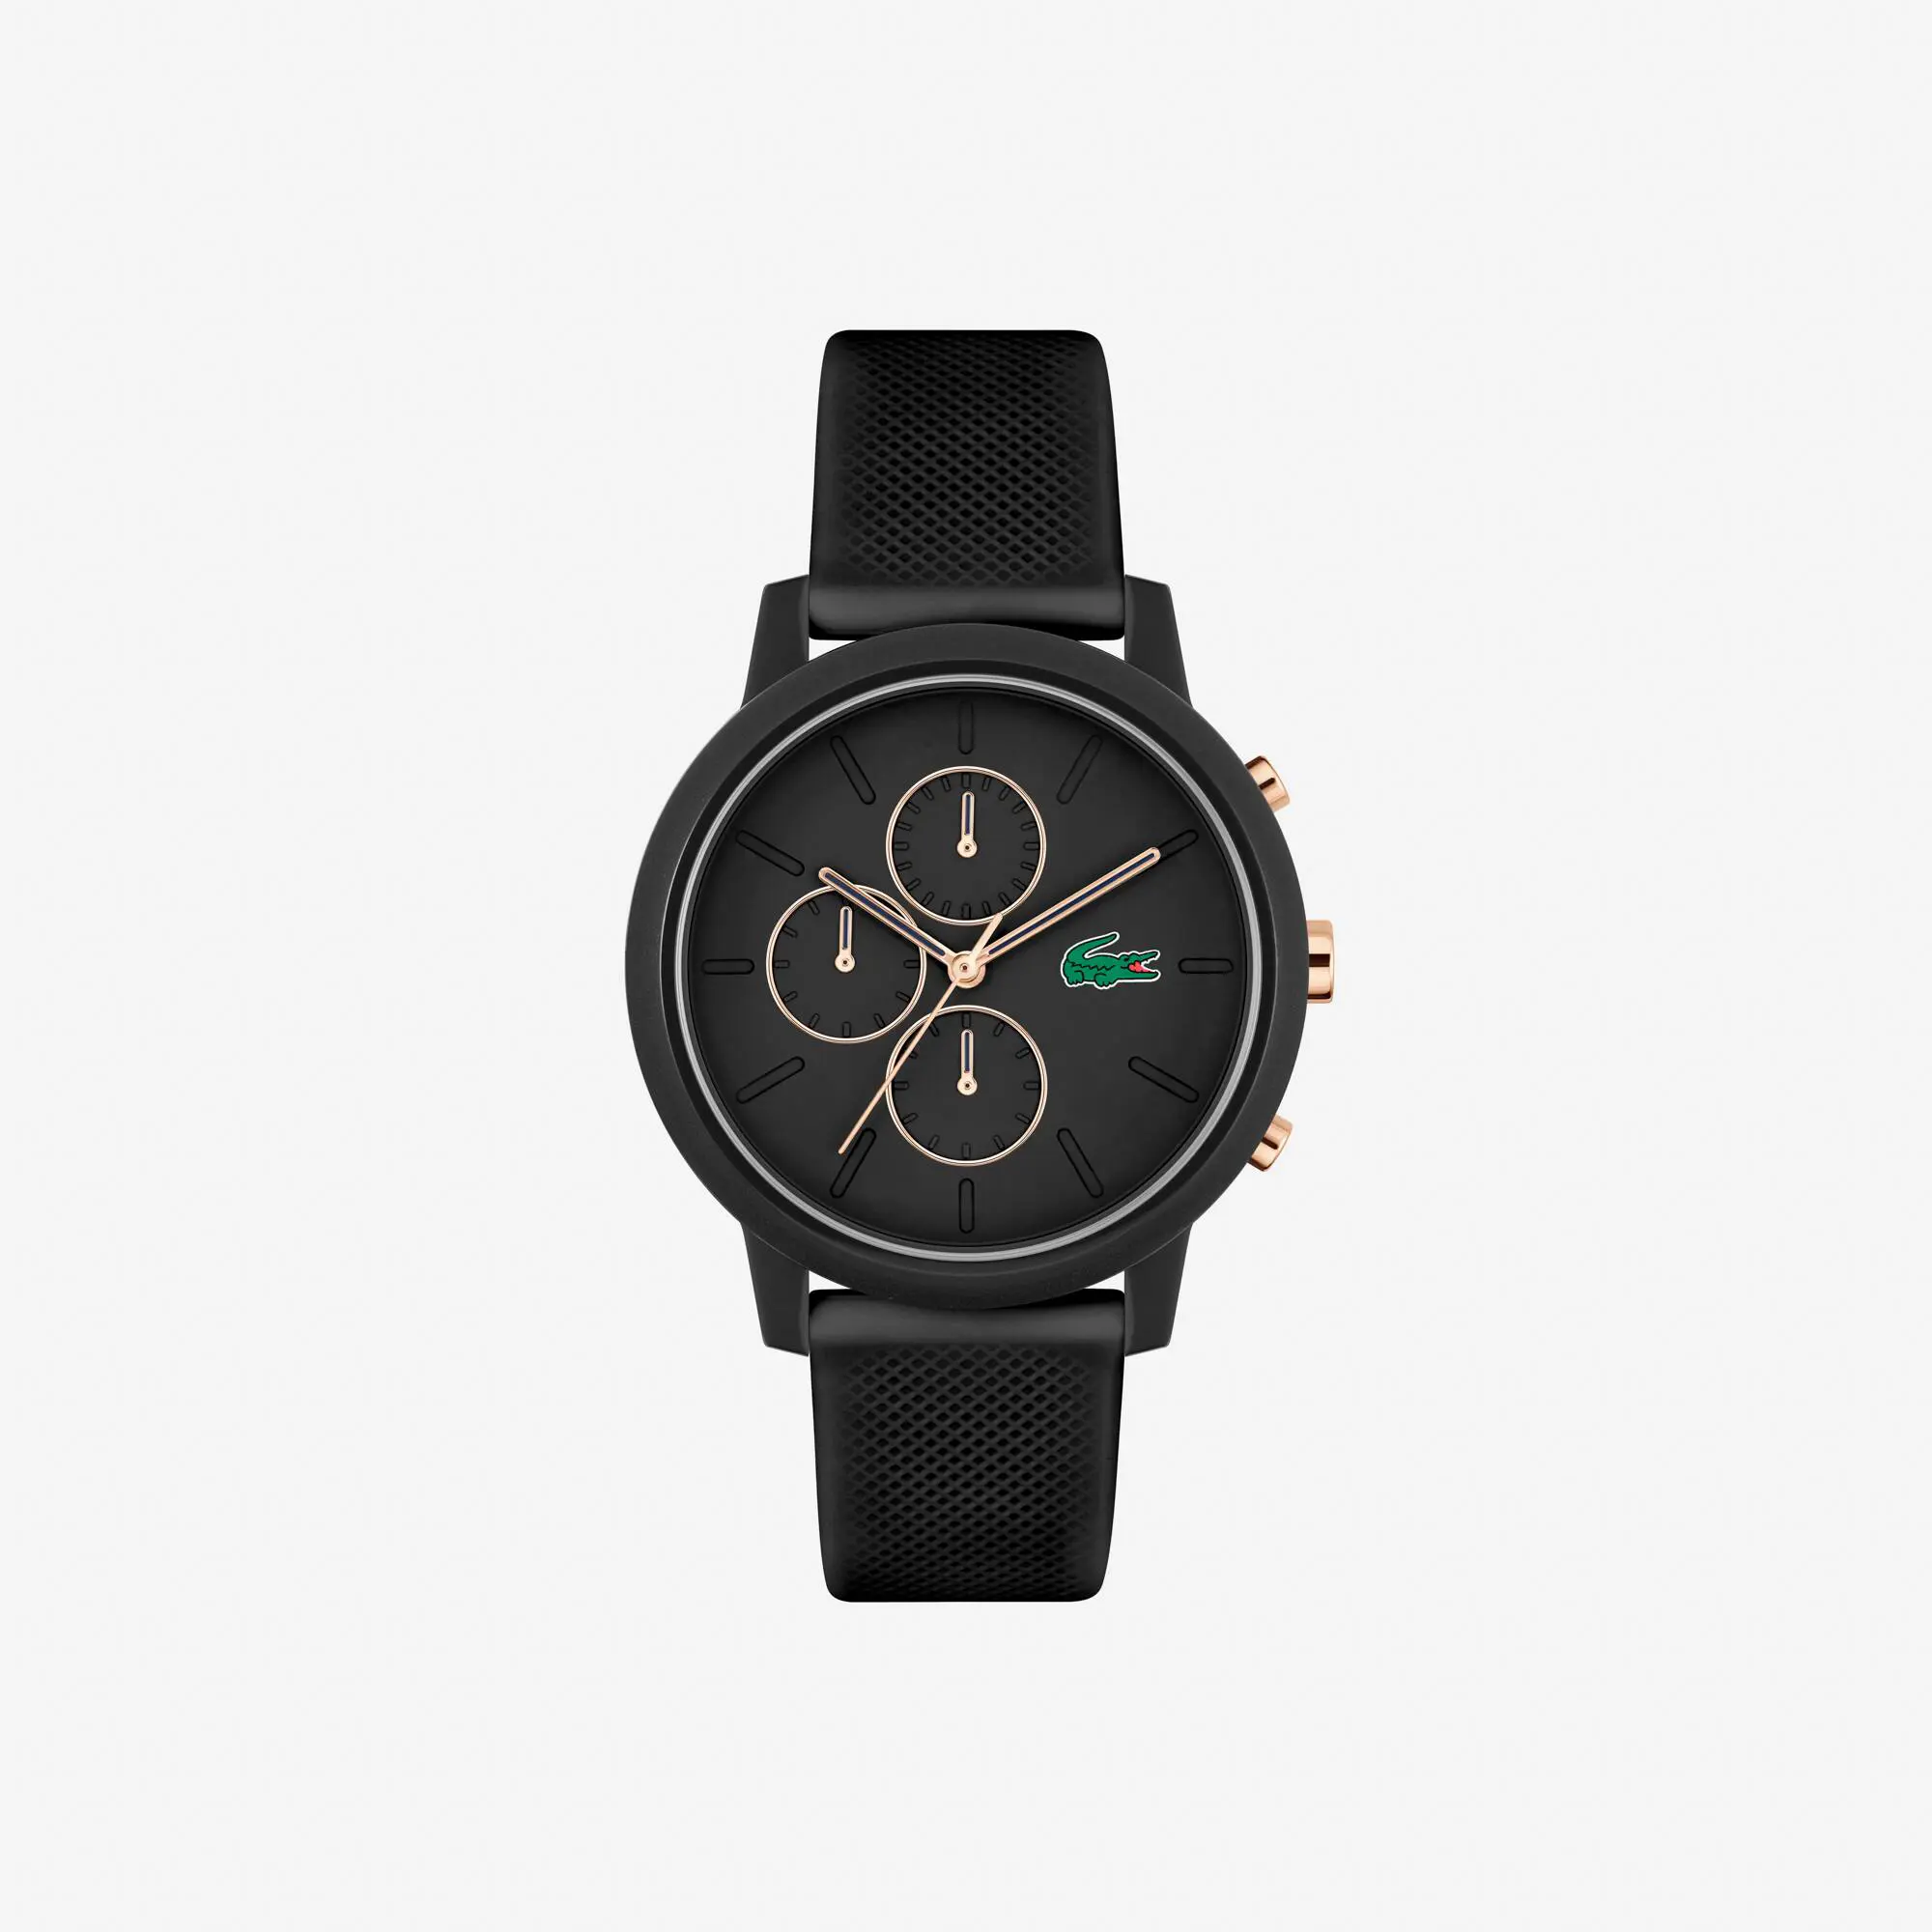 Lacoste .12.12 Chrono Watch Black and Carnation Gold Silicone. 1